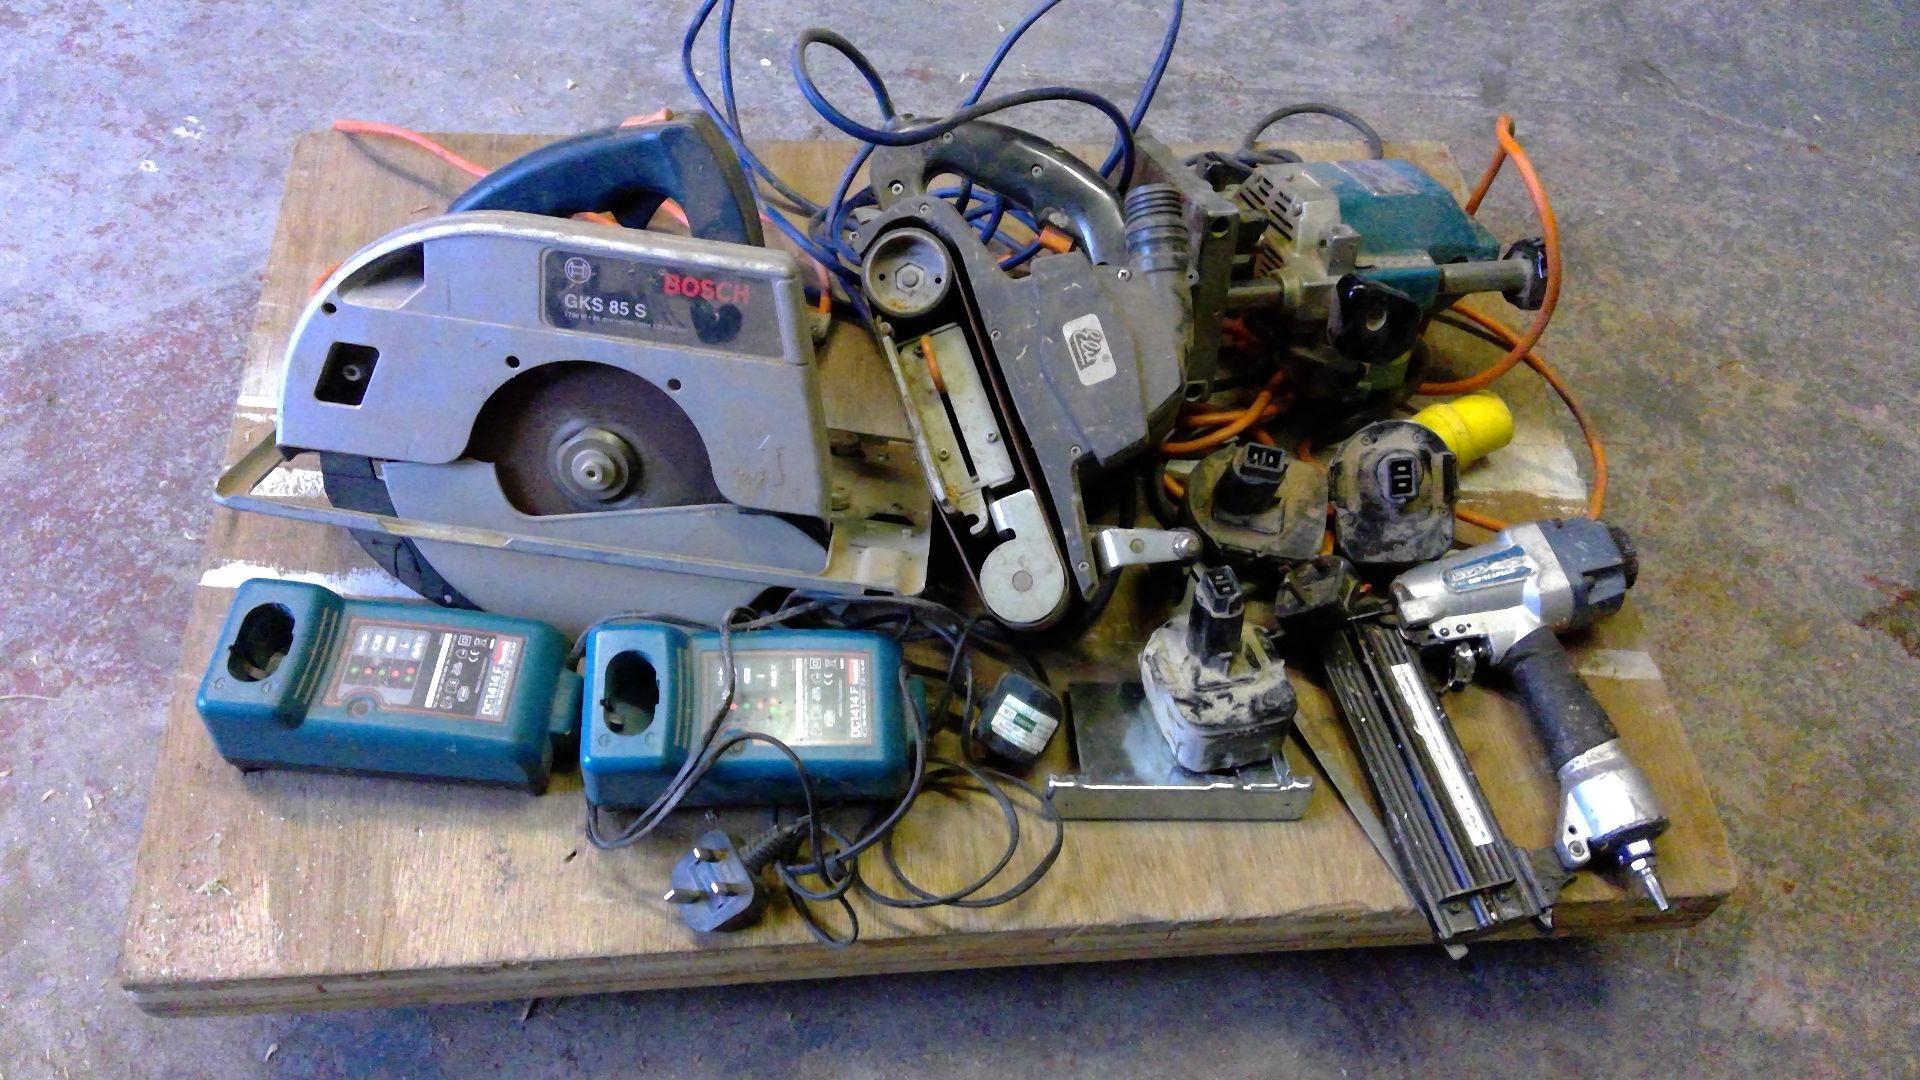 Power tools - Router, skill saw, belt sander, air tool, mini drill, battery chargers - Image 2 of 2